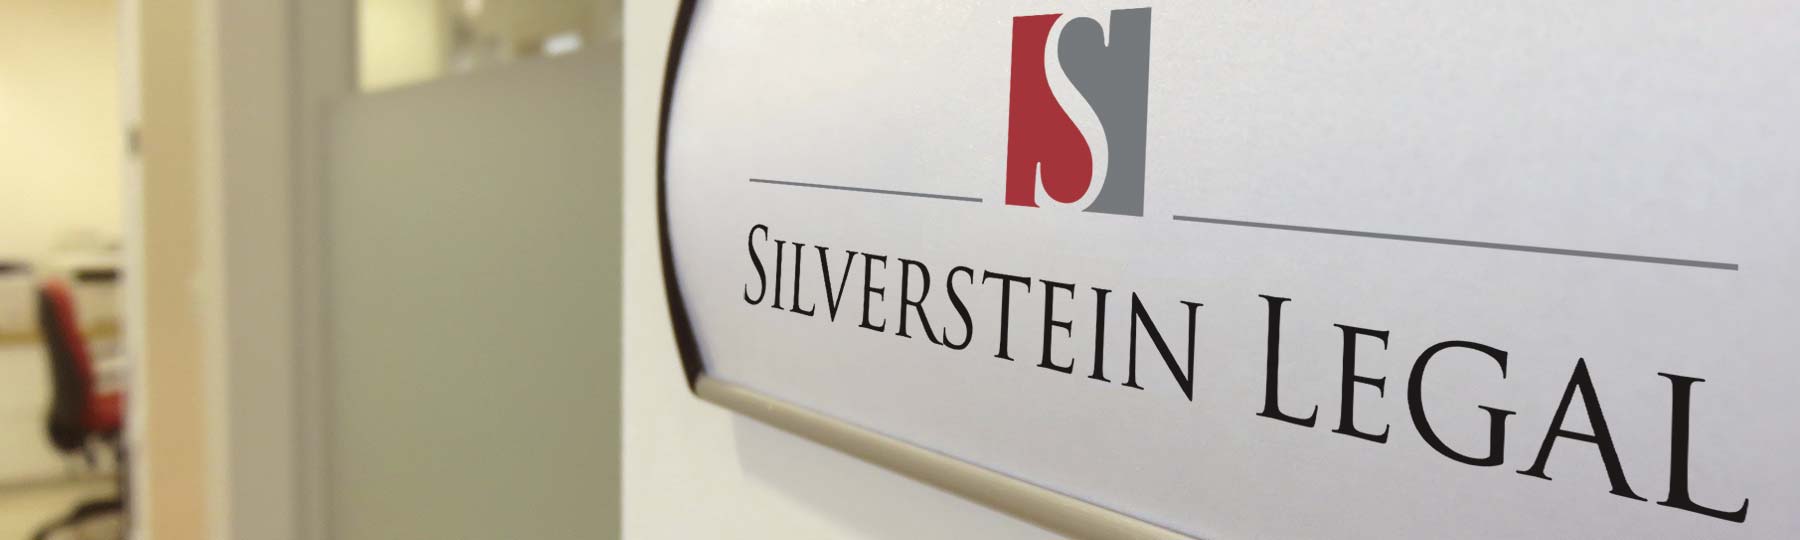 Name plate on wall showing Silverstein Legal logo